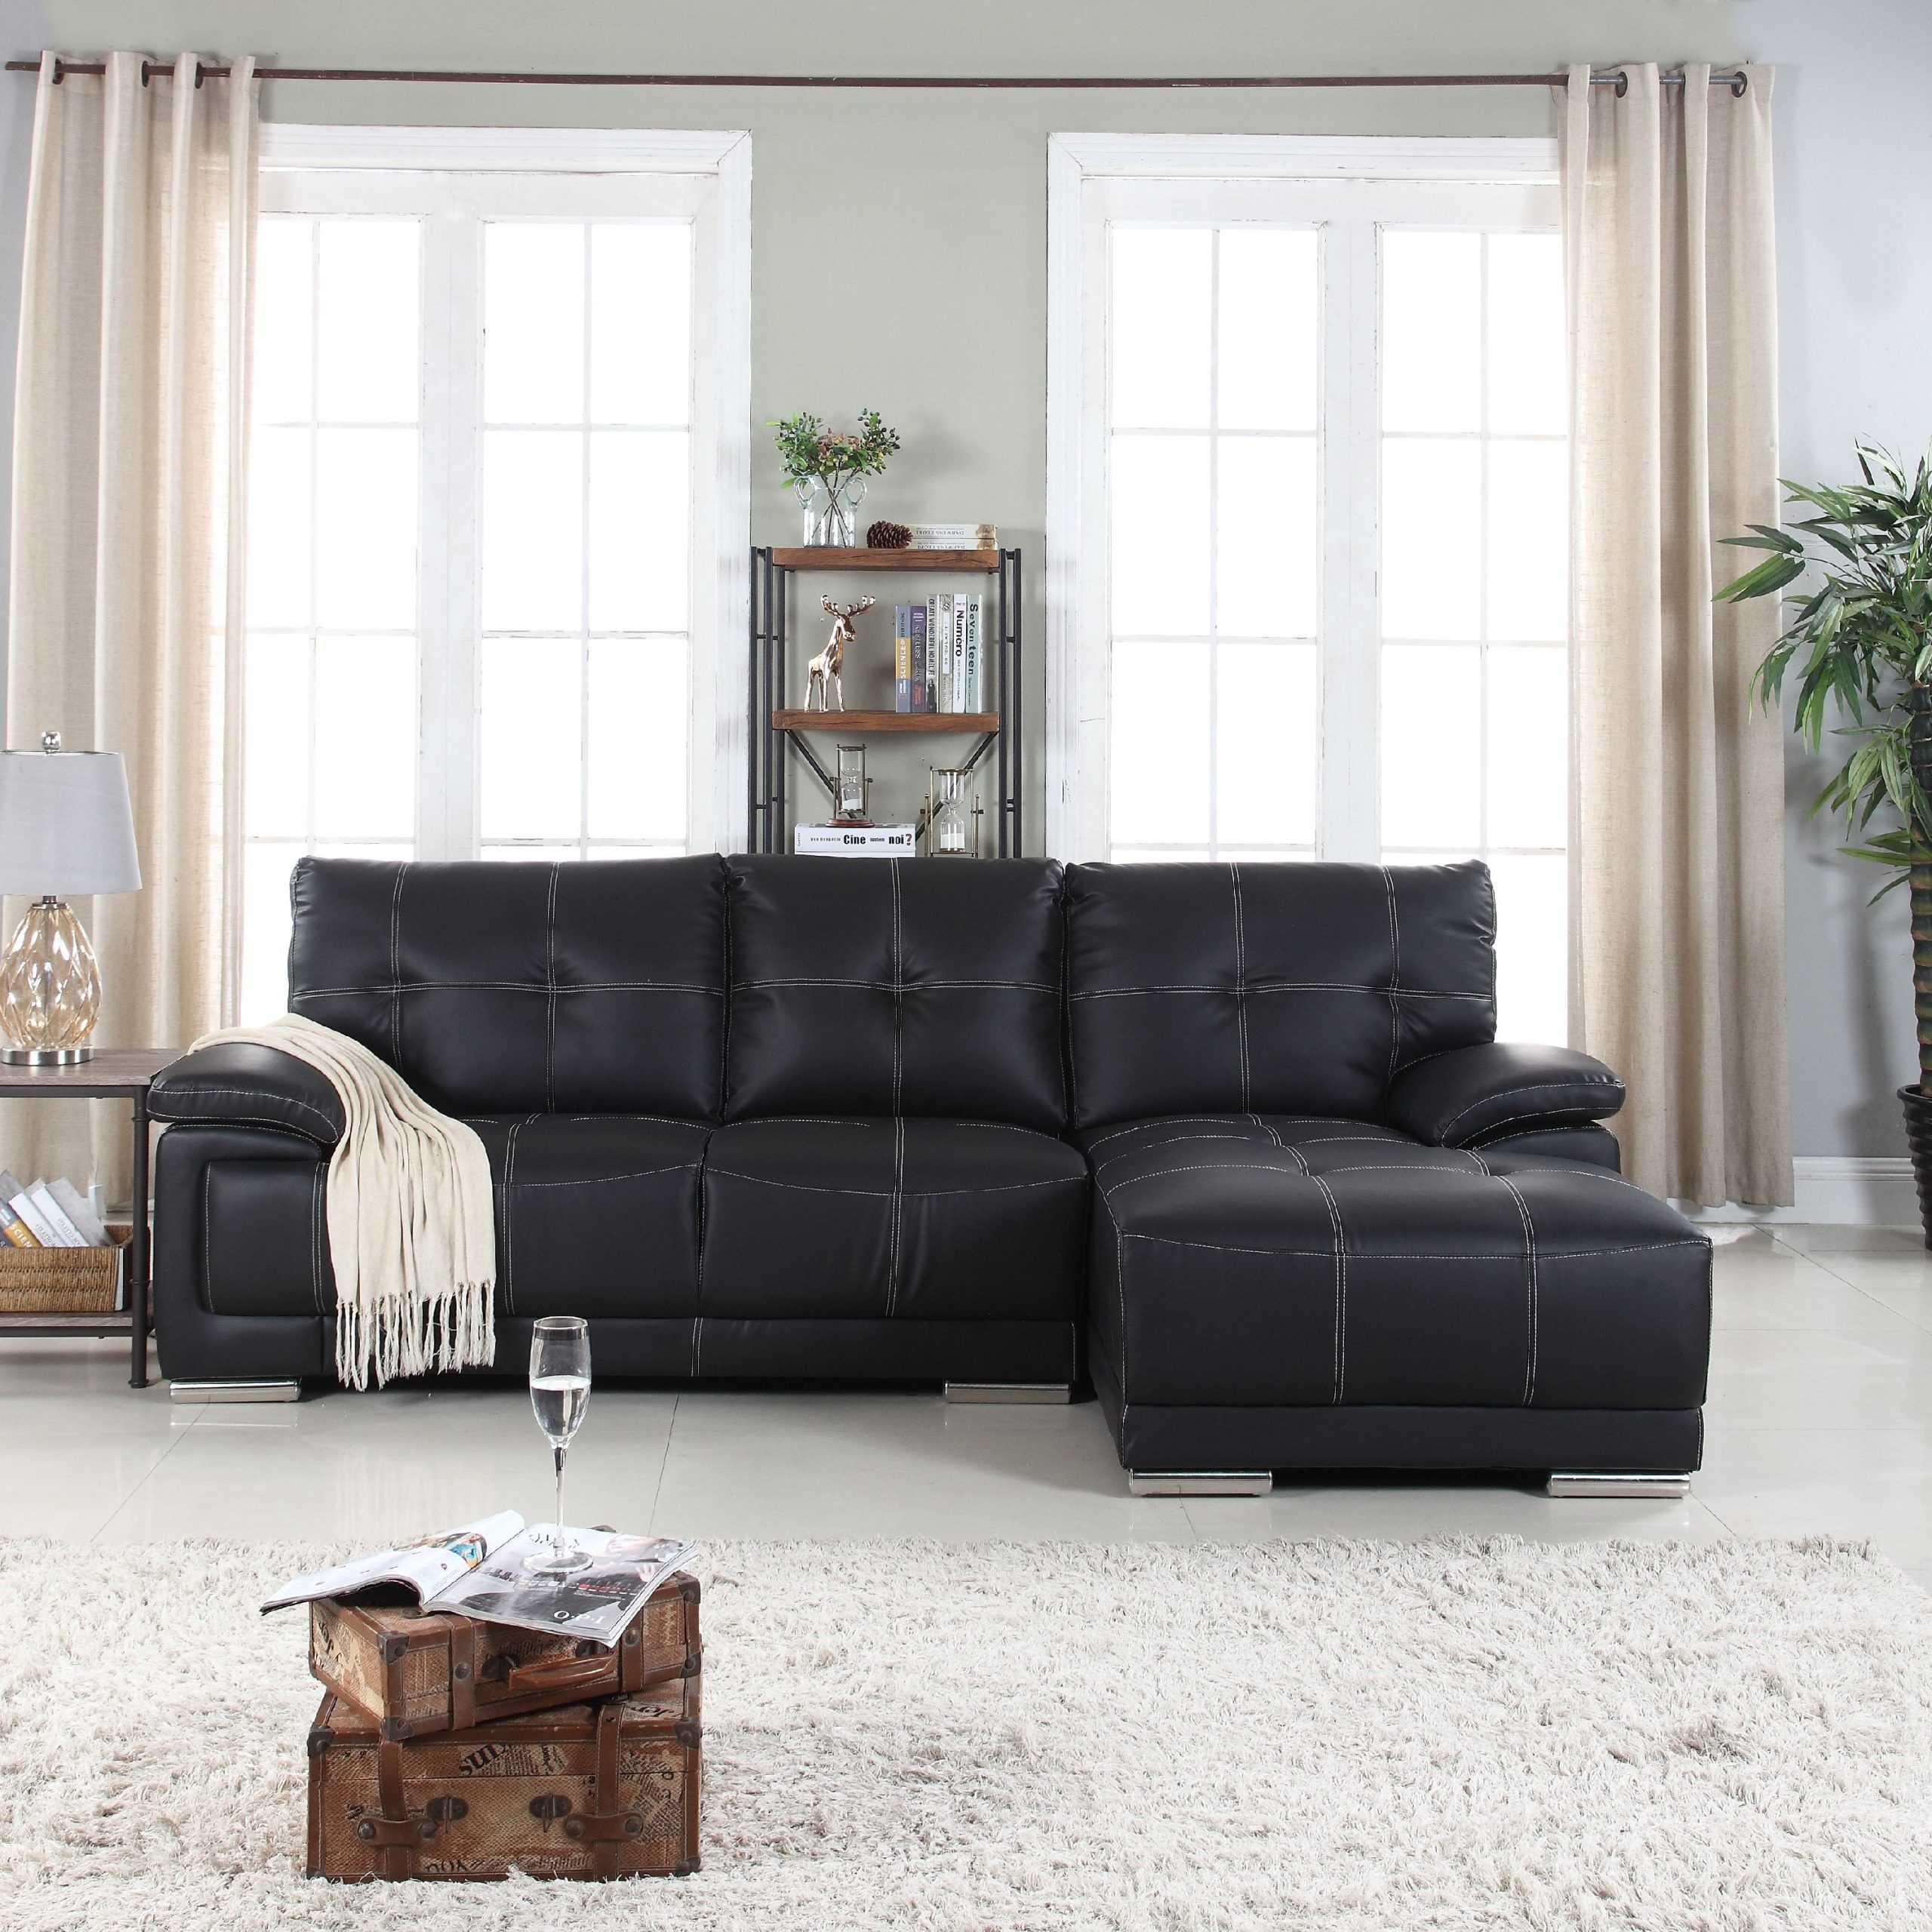 Classic Tufted Faux Leather Sectional Sofa – Walmart With Regard To Faux Leather Sofas (Gallery 13 of 21)